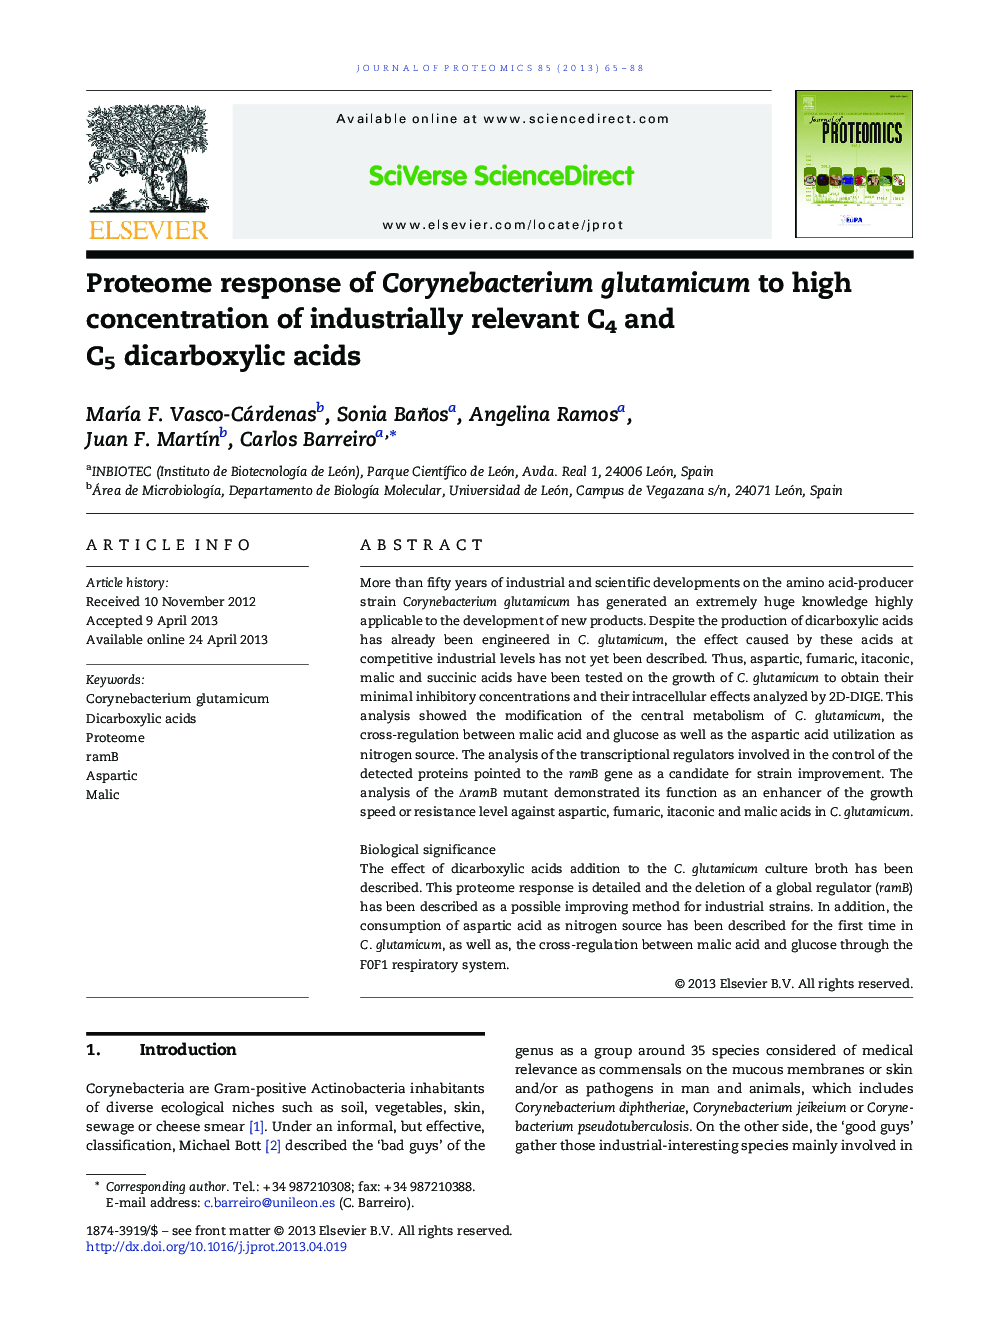 Proteome response of Corynebacterium glutamicum to high concentration of industrially relevant C4 and C5 dicarboxylic acids